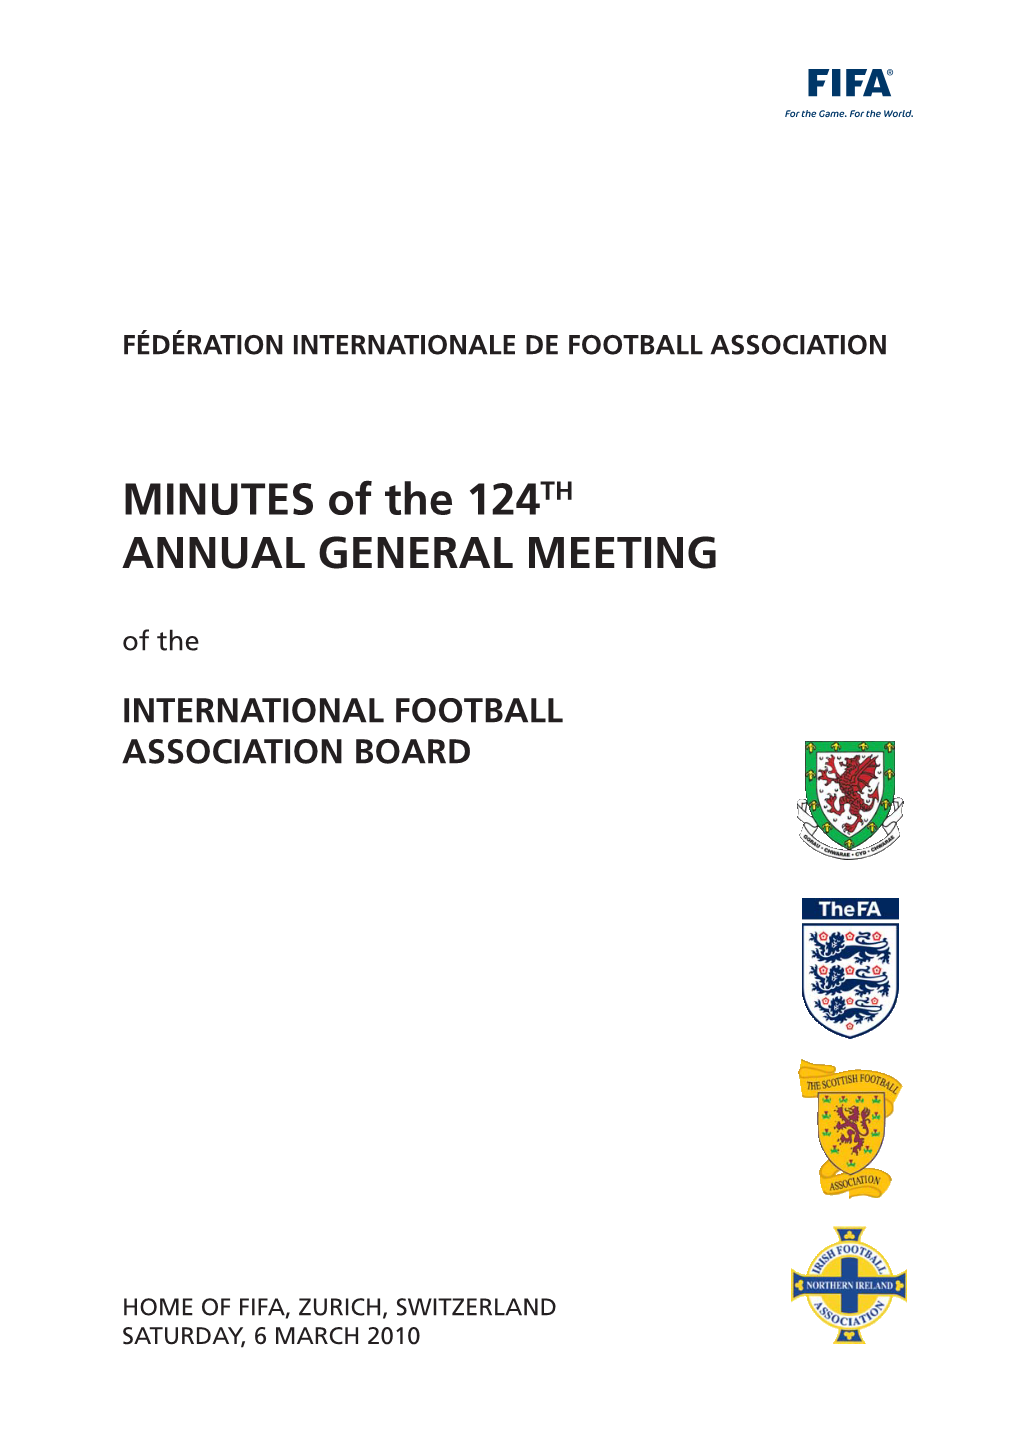 MINUTES of the 124TH ANNUAL GENERAL MEETING of The